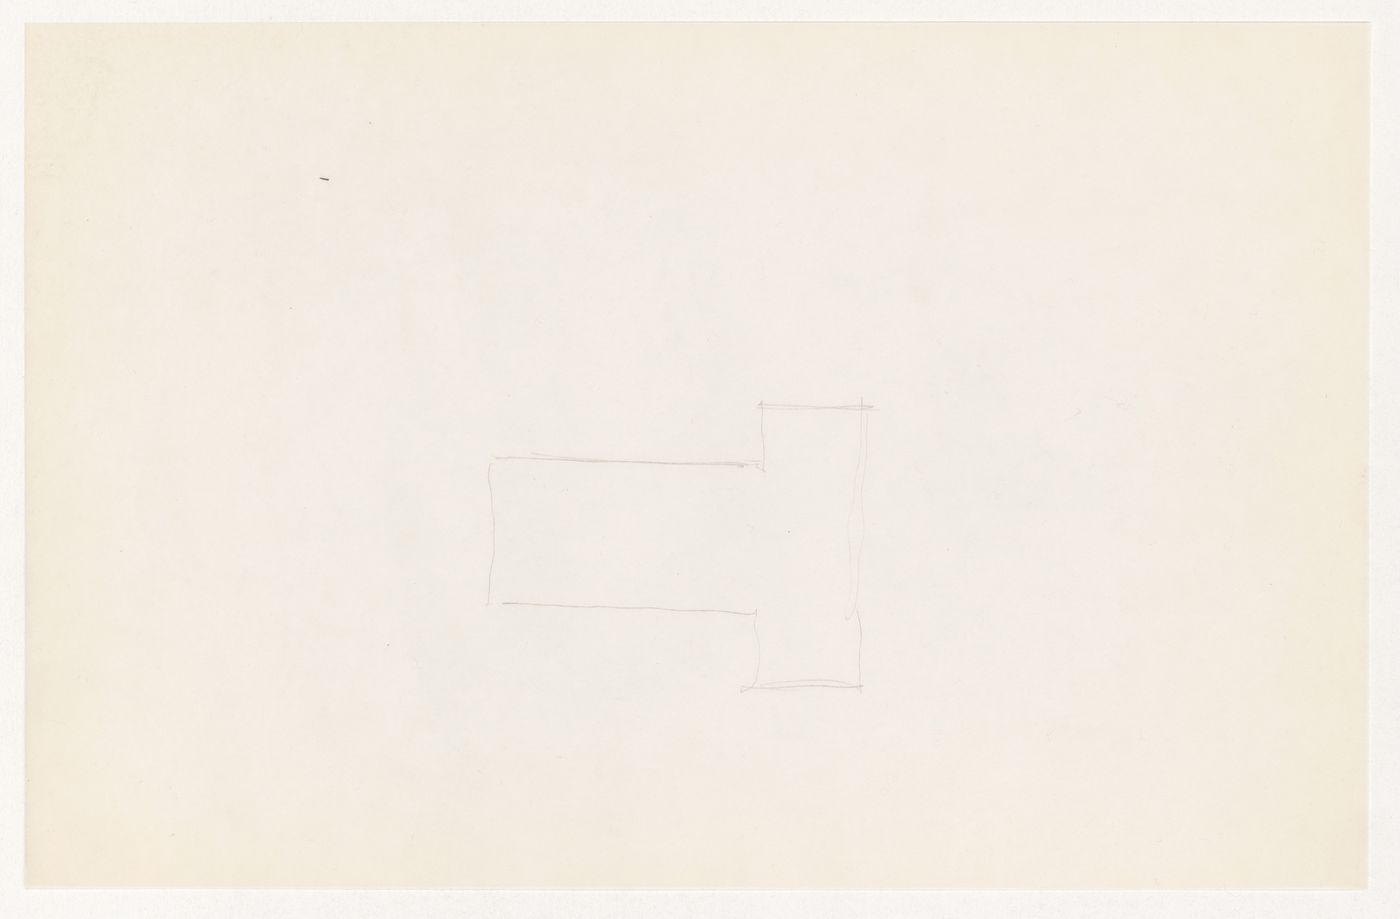 Sketch, possibly a sectional detail for the Metallurgy Building, Illinois Institute of Technology, Chicago